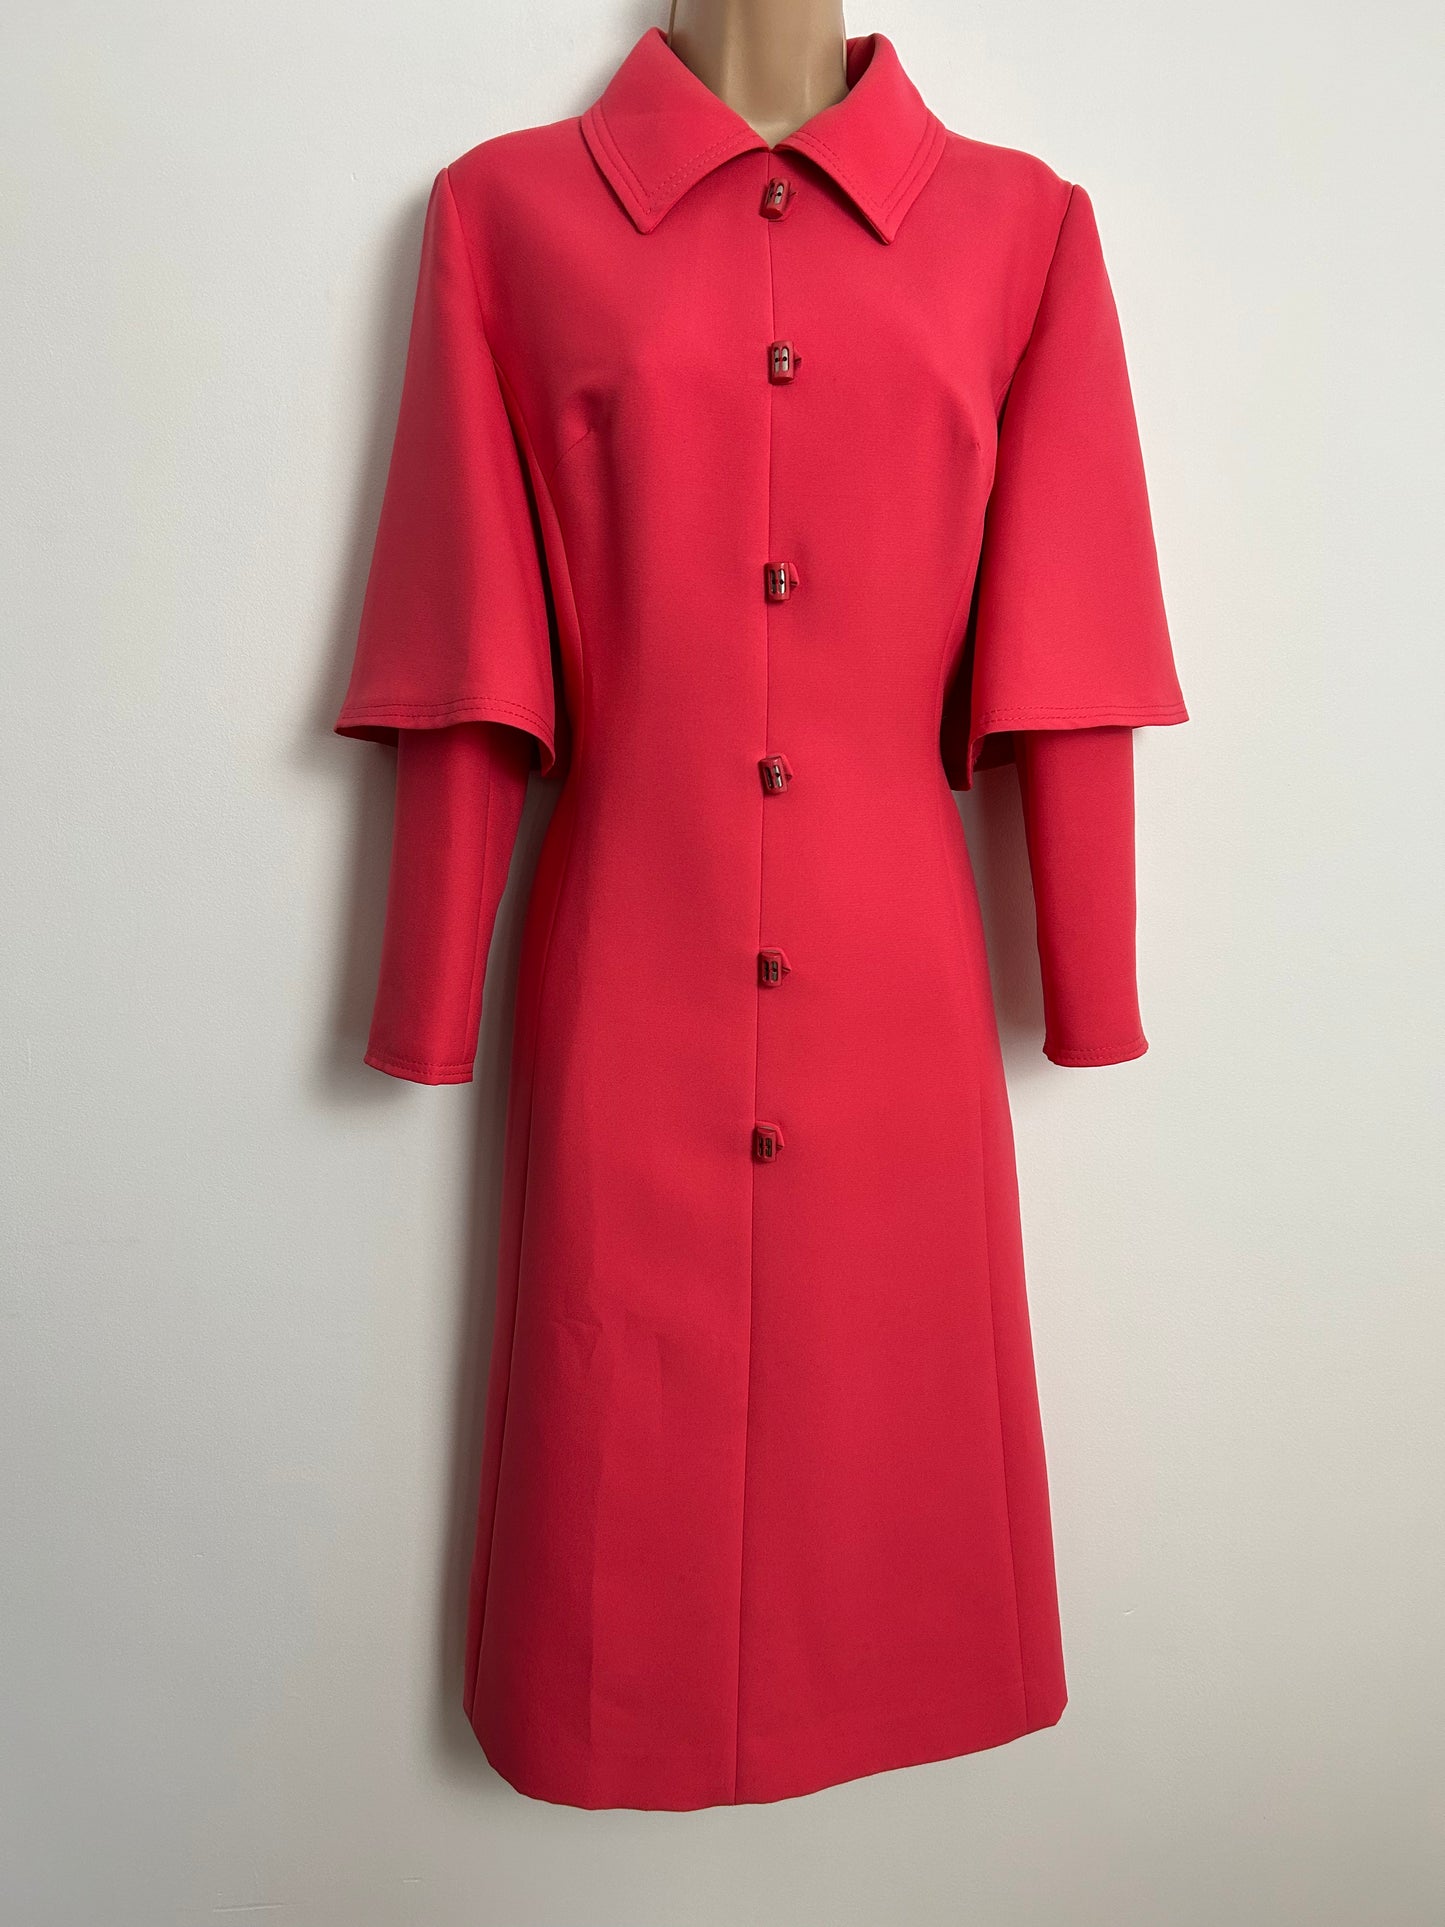 Vintage 1960s UK Size 12 PEGGY FRENCH COUTURE Coral Pink Layered Sleeve Shift Dress